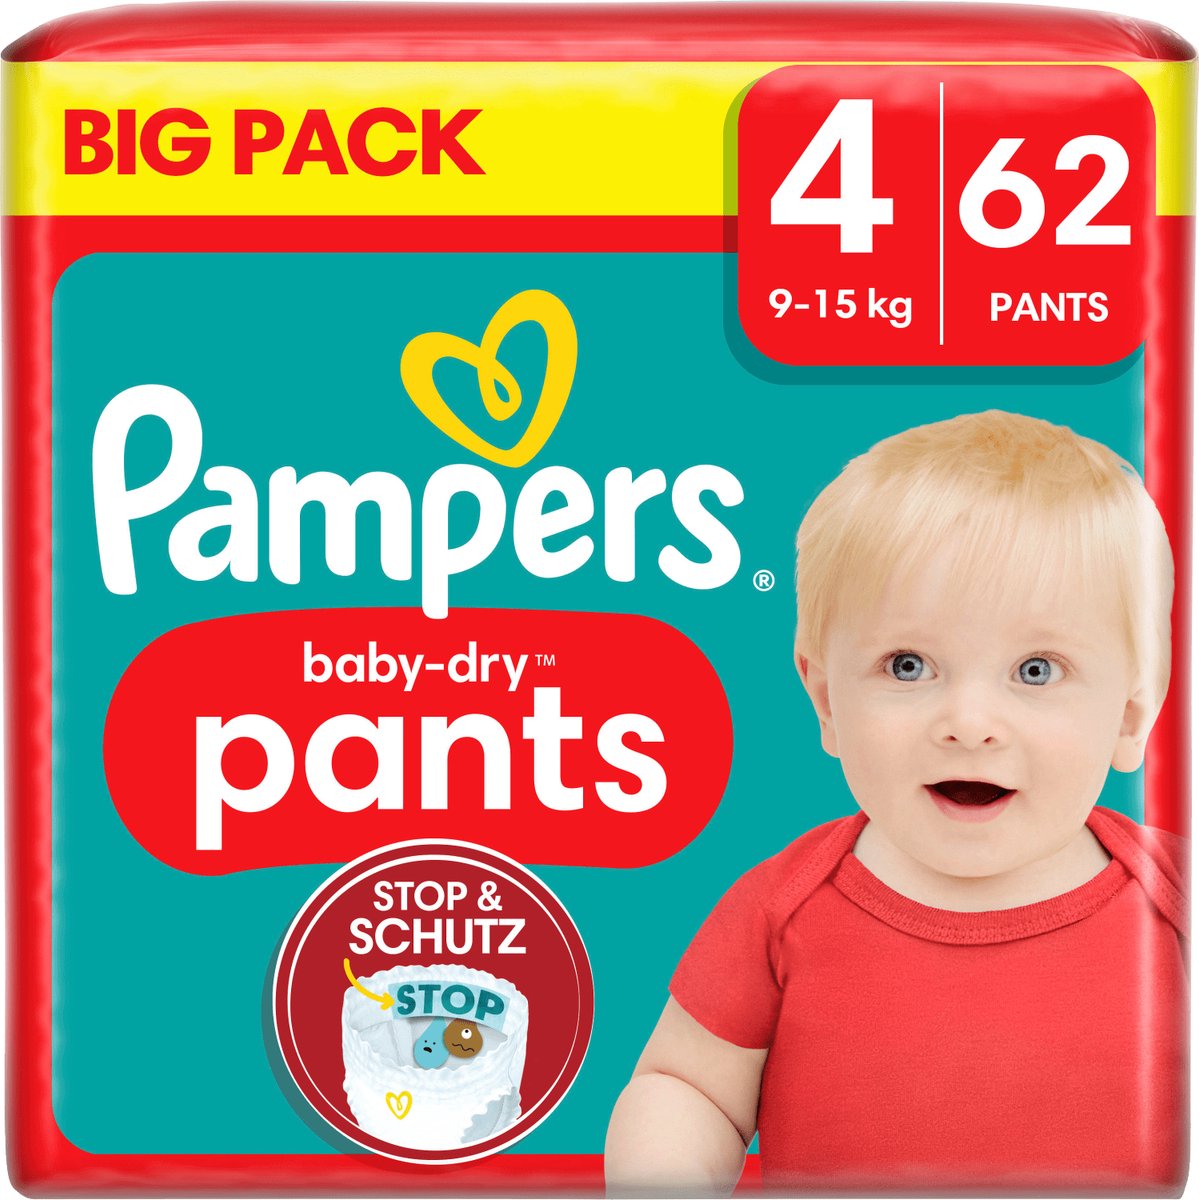 Pampers Night Pants Couches-Culottes Pour La Nuit Taille 4 - 156 Couches- Culottes 